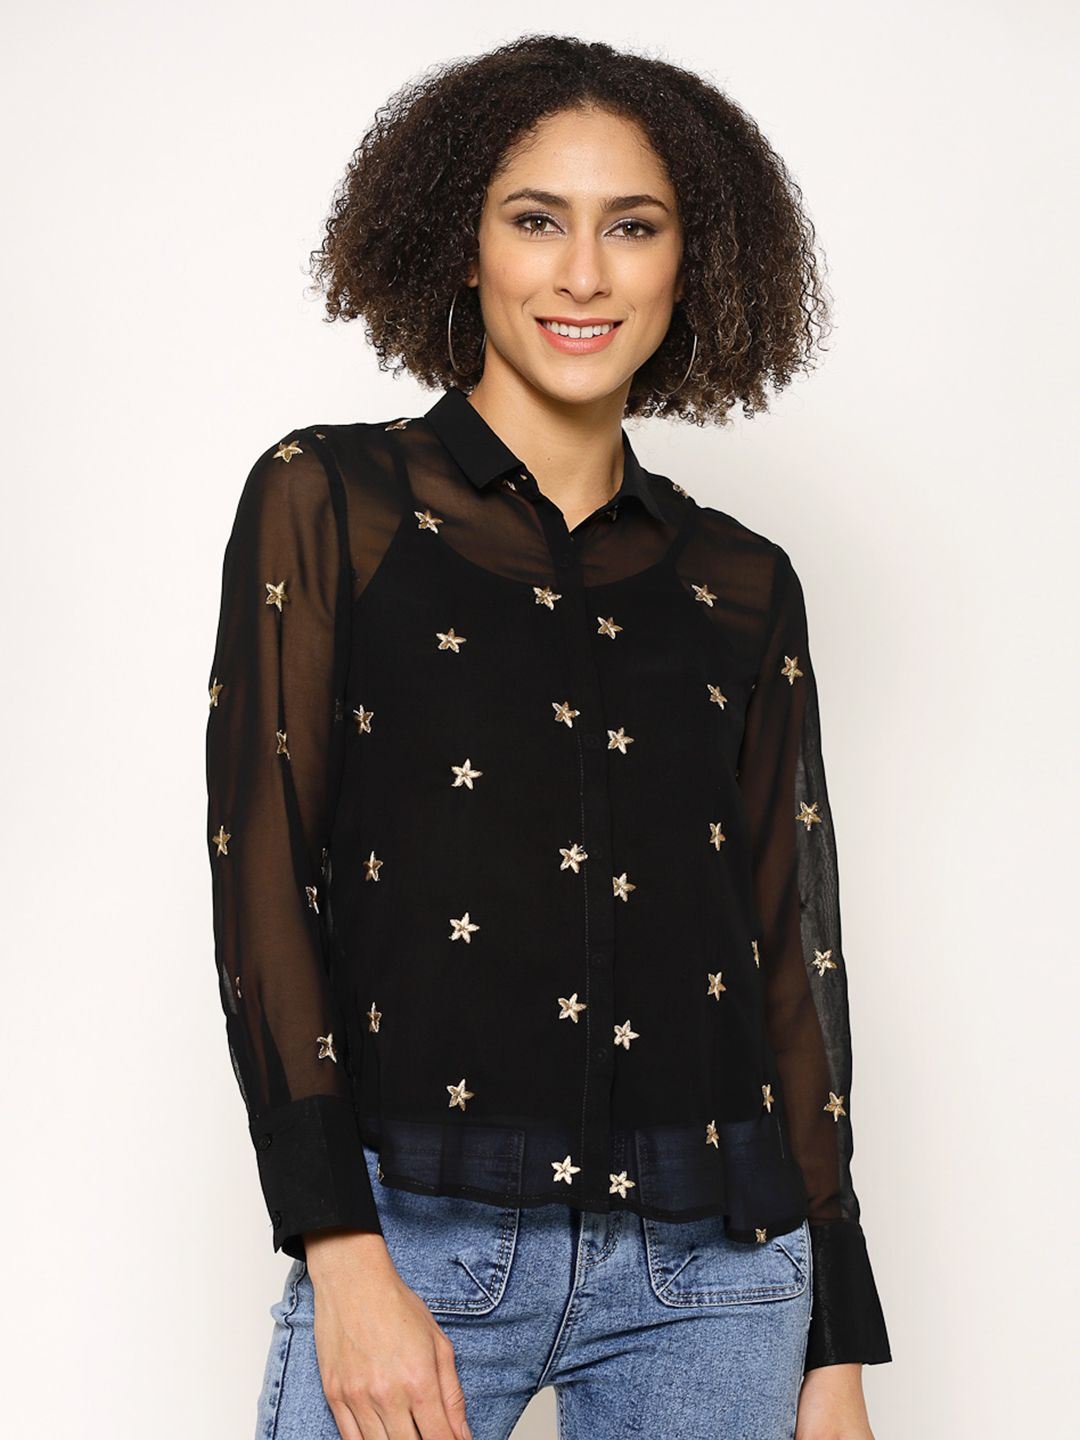 Buy House of Kkarma HOUSE OF KKARMA Women Black & Gold-Toned Regular Fit Embellished  Casual Shirt at Redfynd